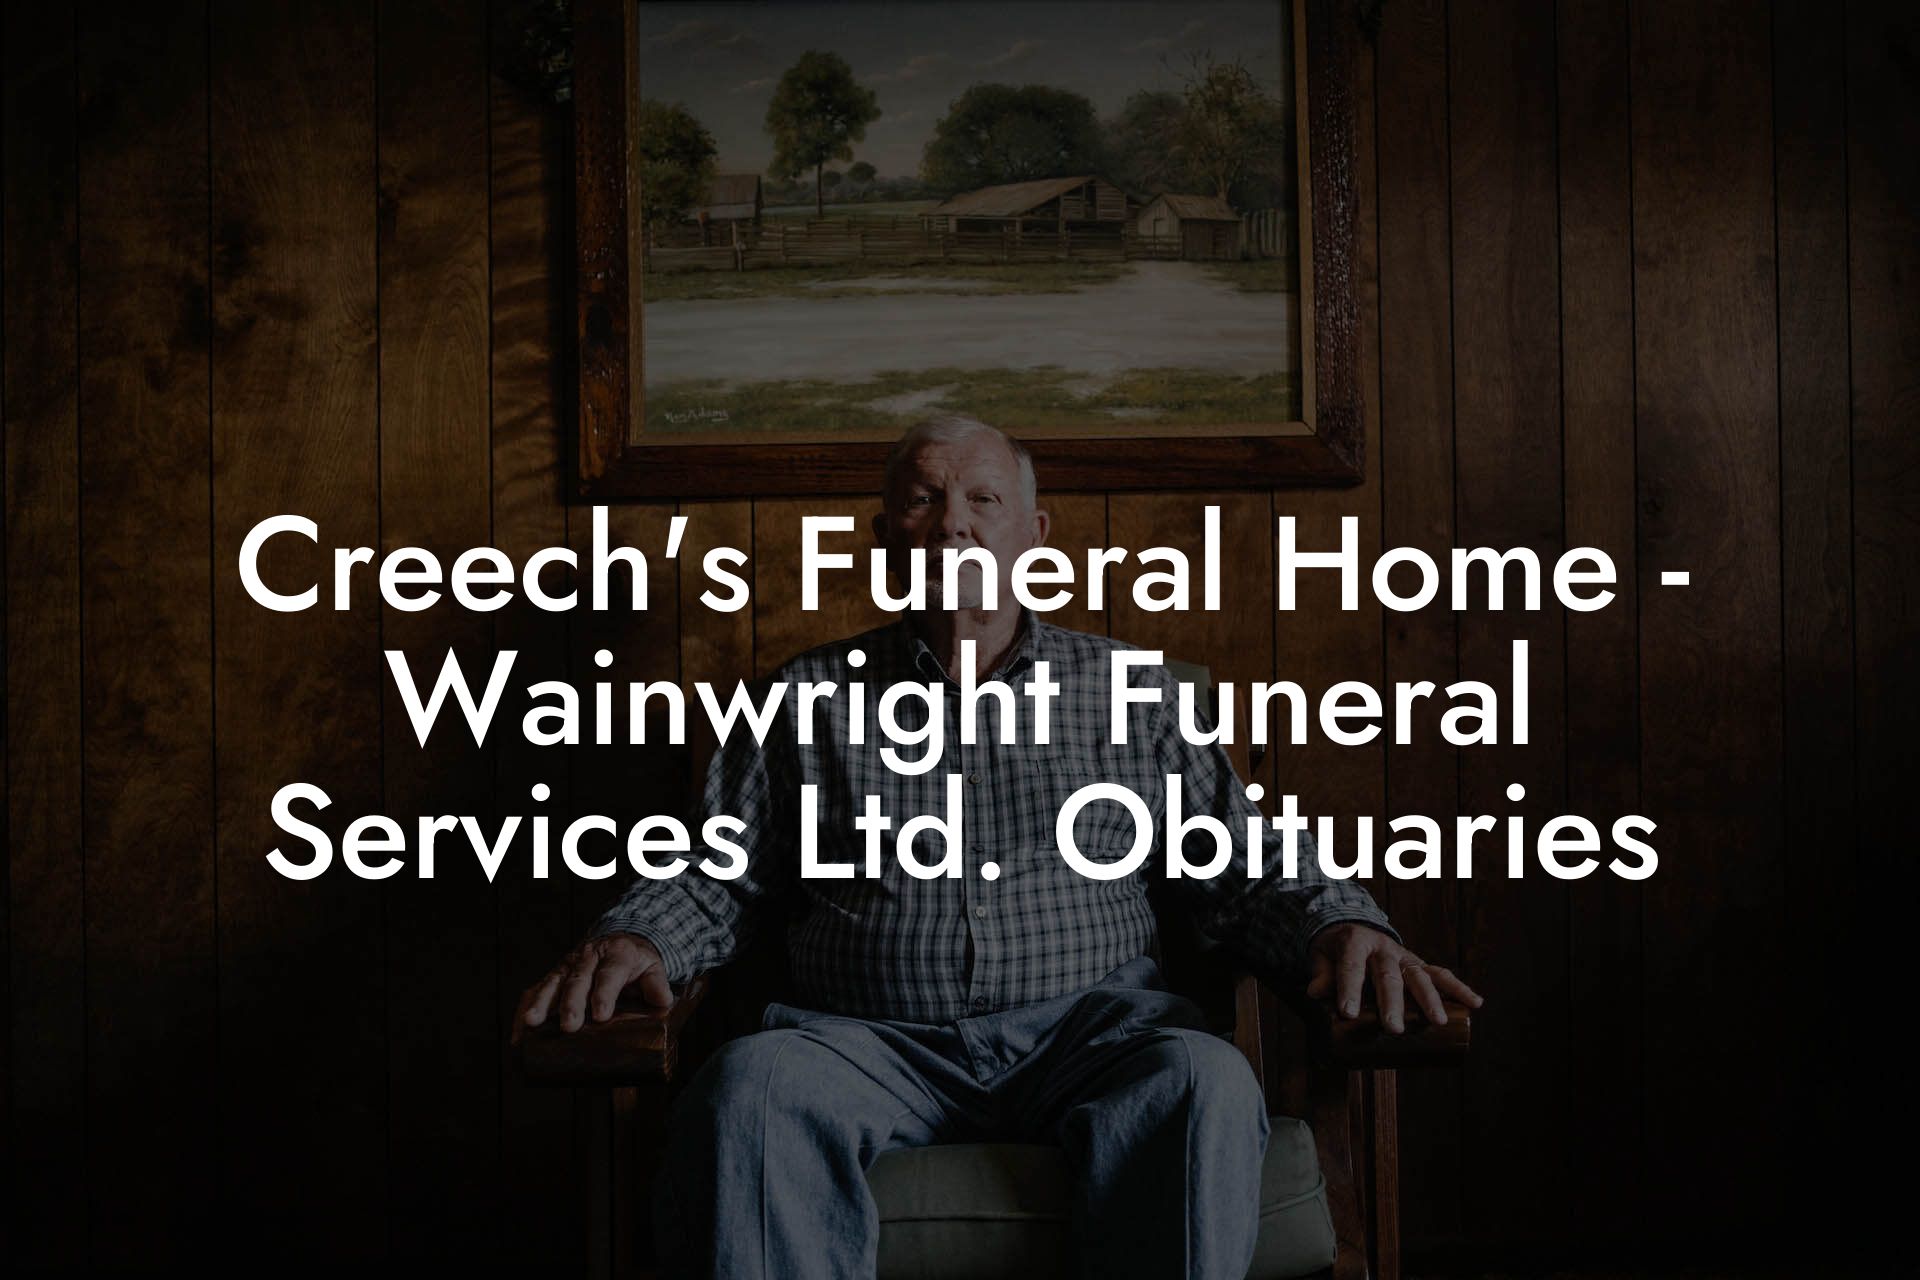 Creech's Funeral Home - Wainwright Funeral Services Ltd. Obituaries